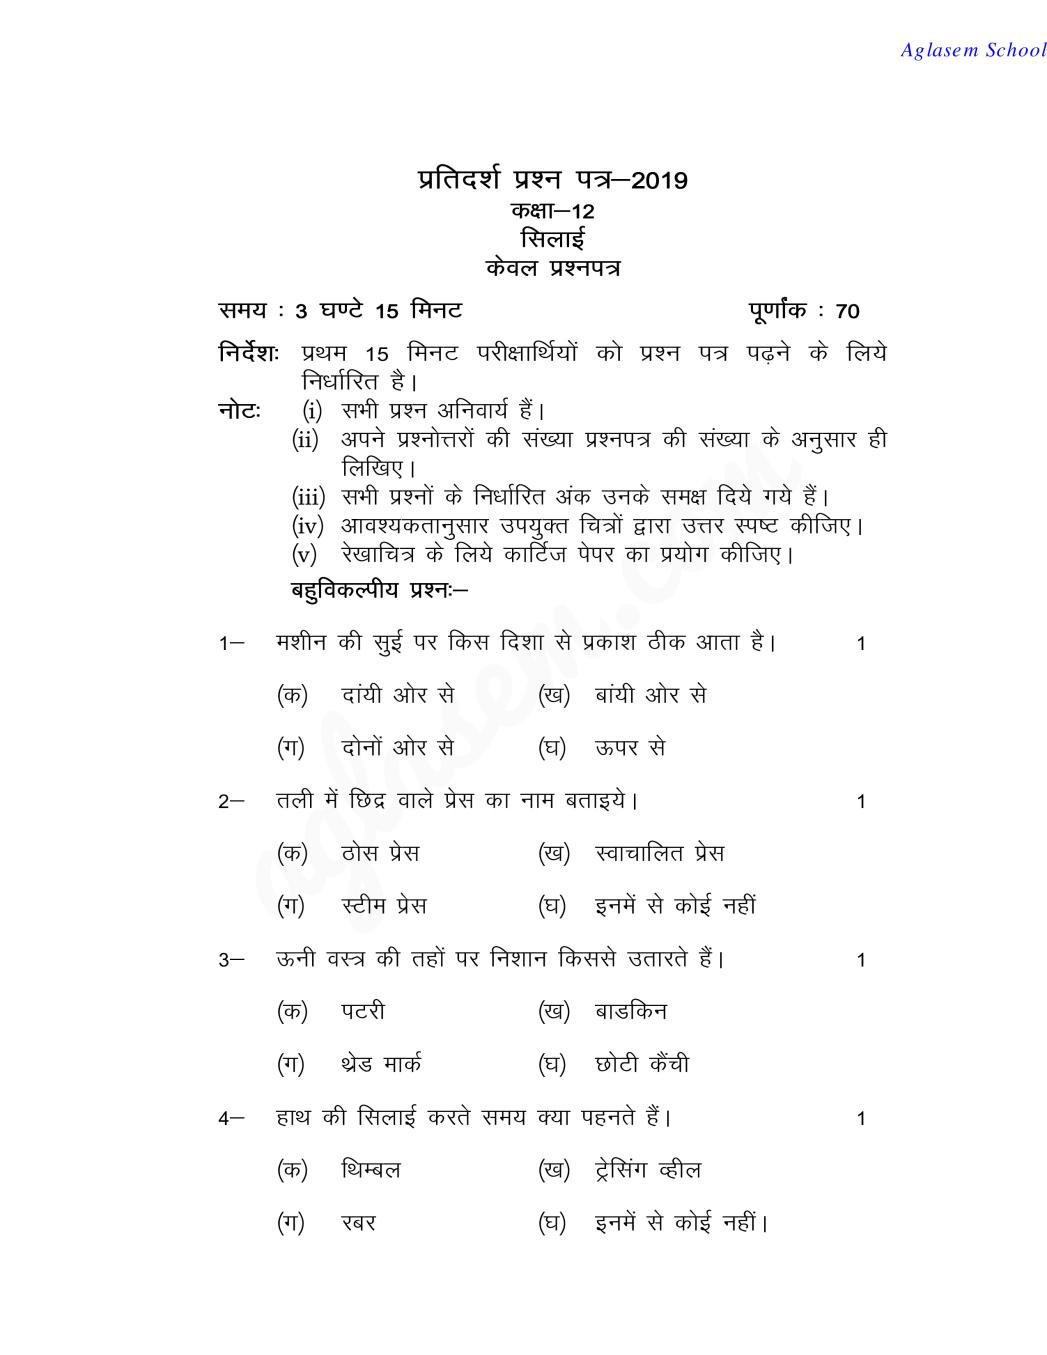 UP Board Class 12 Model Paper 2019 TAILORING CRAFT - Page 1